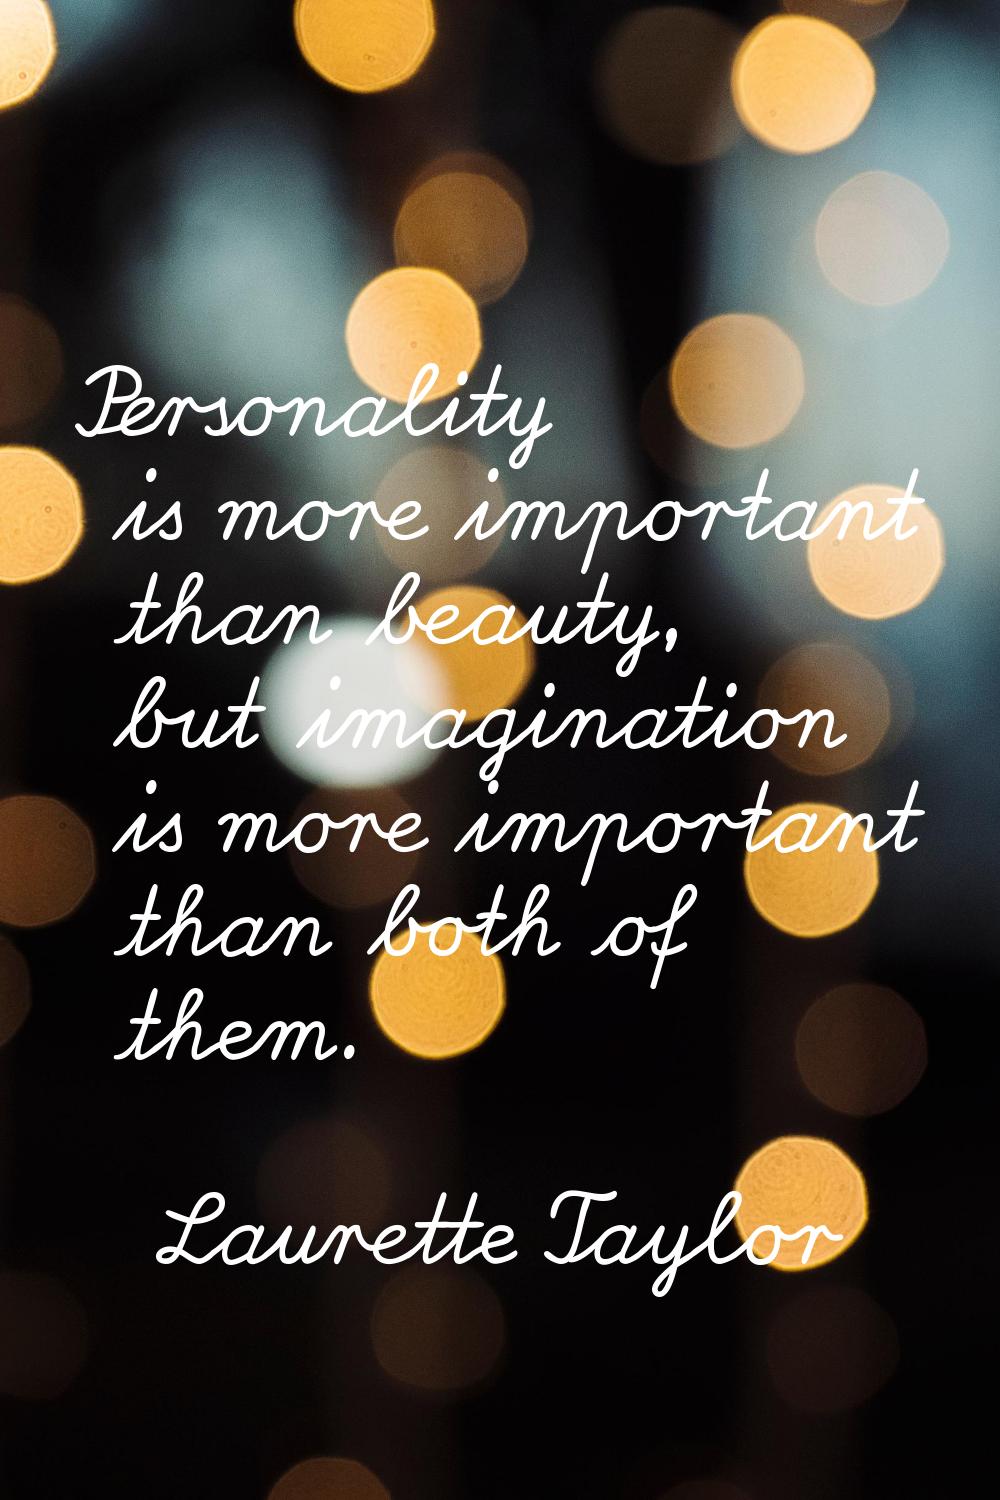 Personality is more important than beauty, but imagination is more important than both of them.